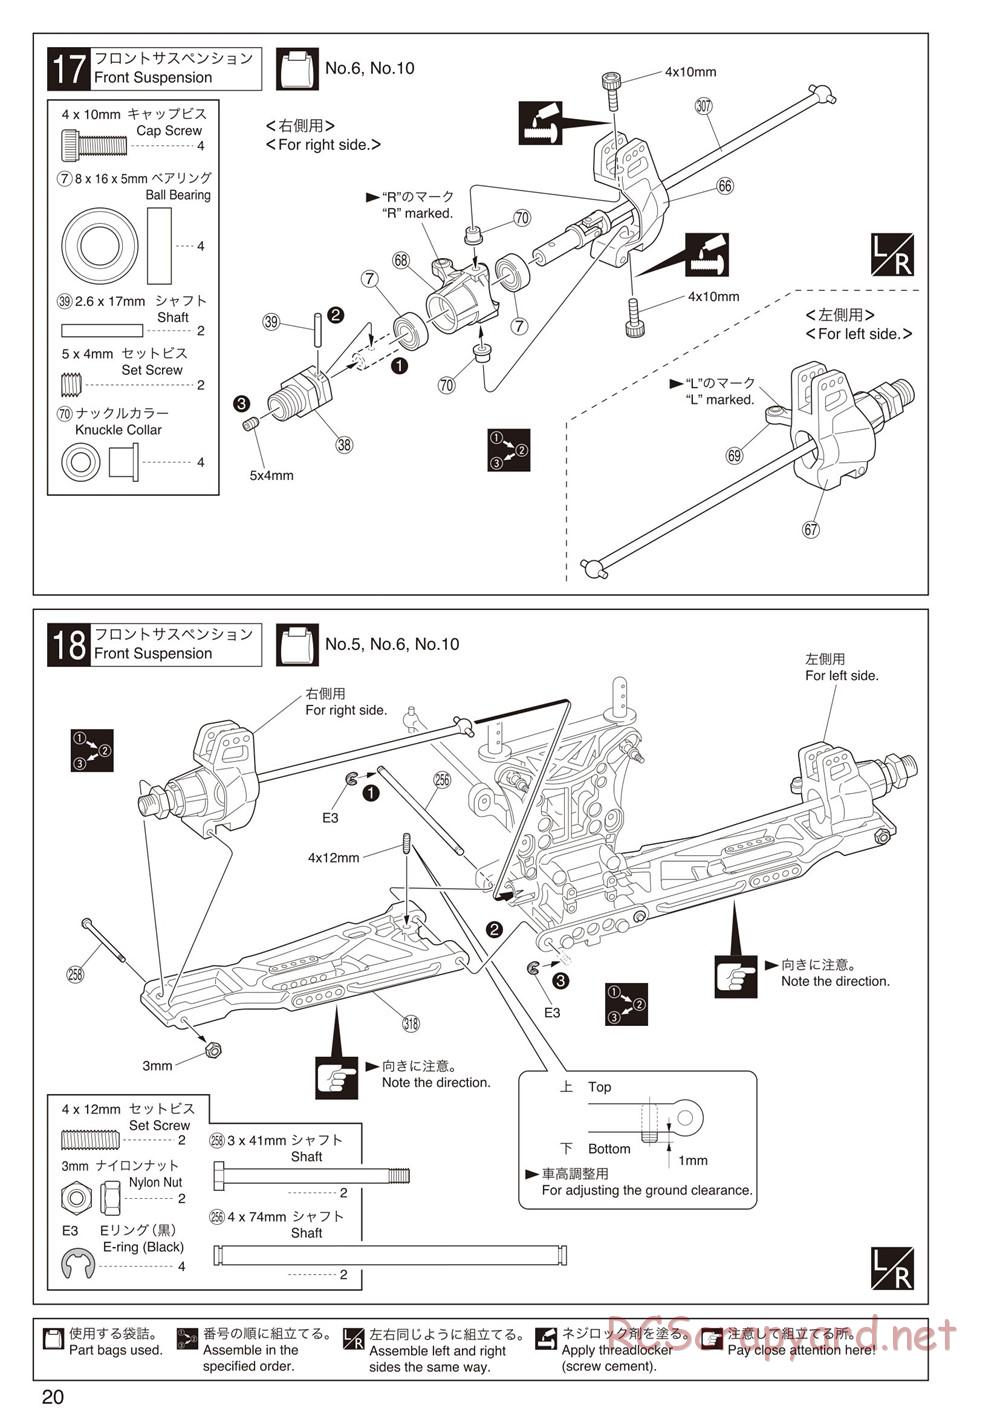 Kyosho - Inferno ST-RR Evo.2 - Manual - Page 24